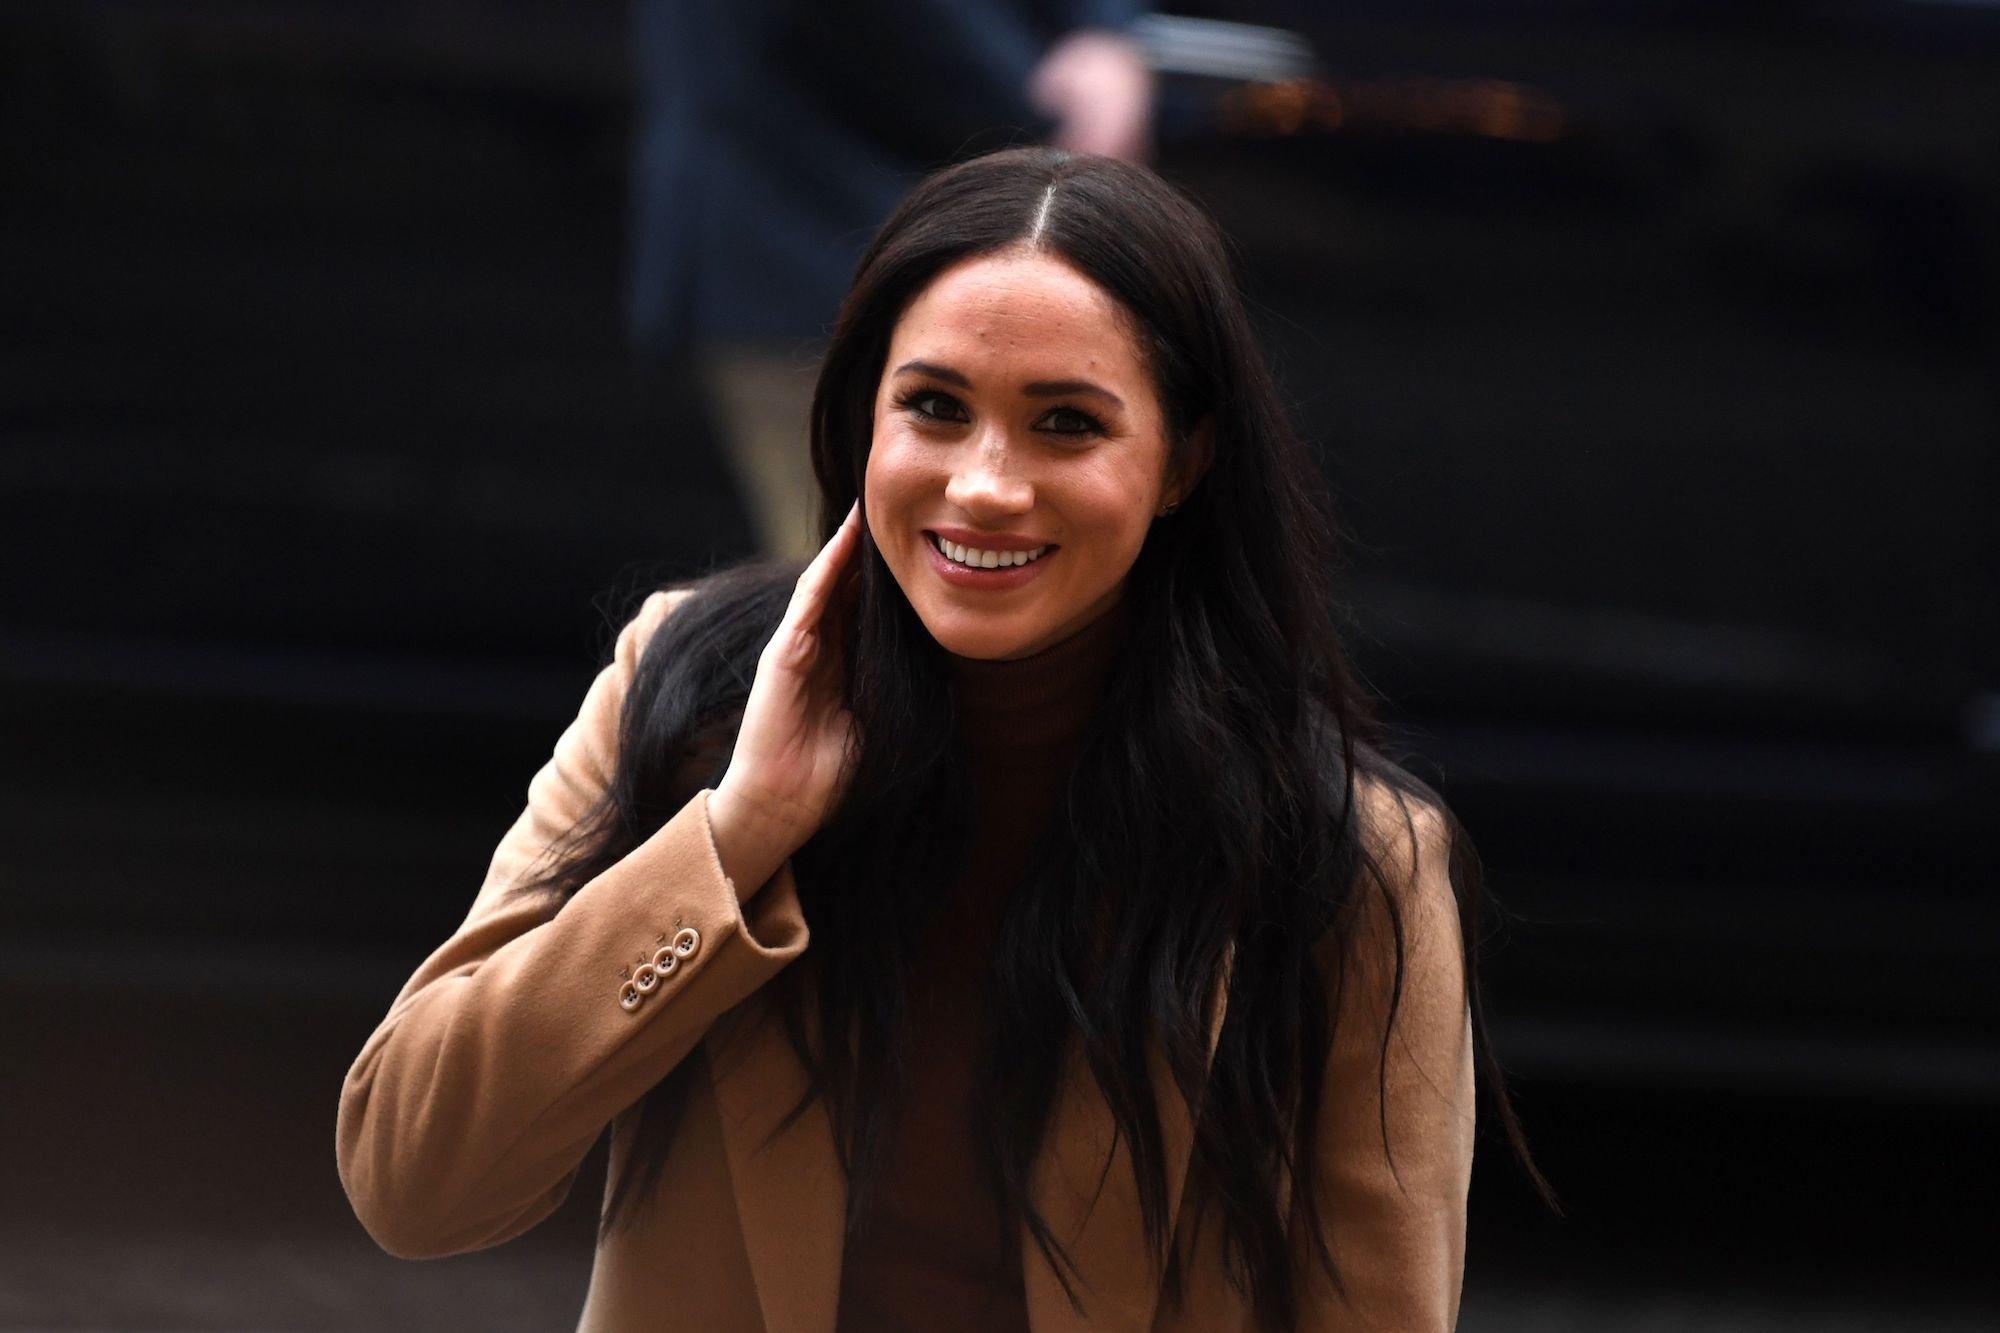 Meghan Markle smiling at the camera